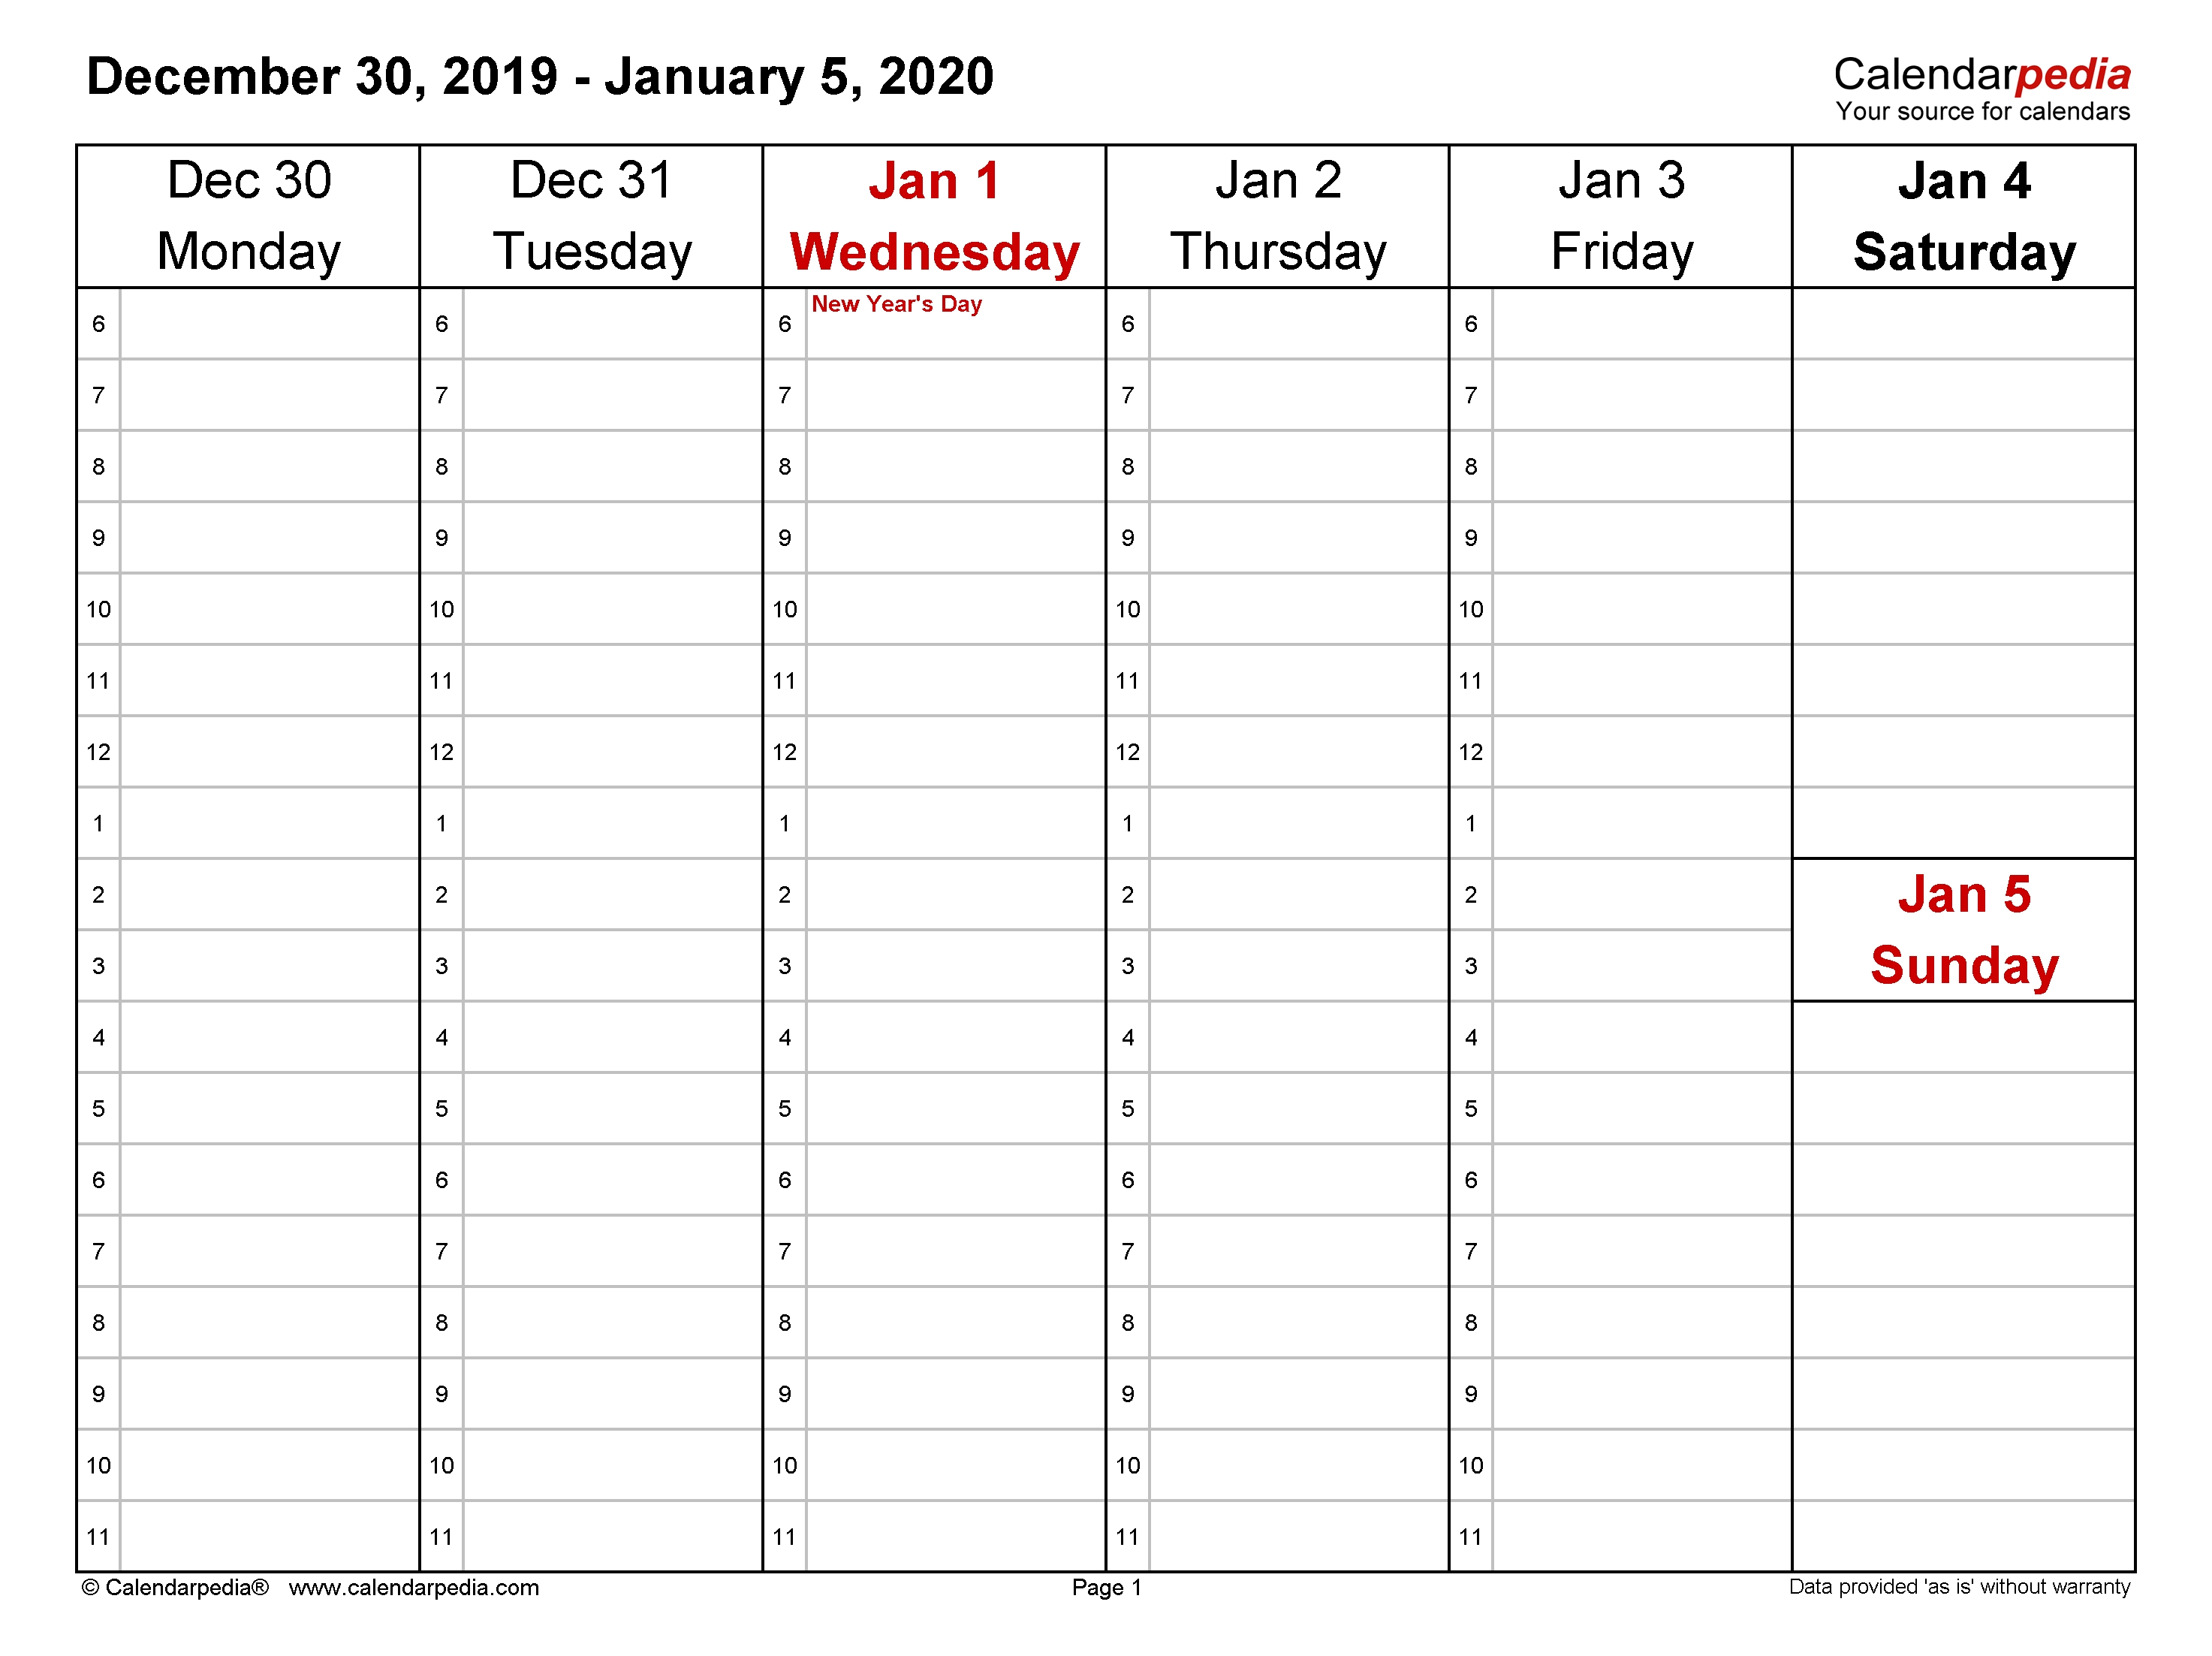 Weekly Calendars 2020 For Word - 12 Free Printable Templates pertaining to 2020 Calendar Format Monday Through Friday Week